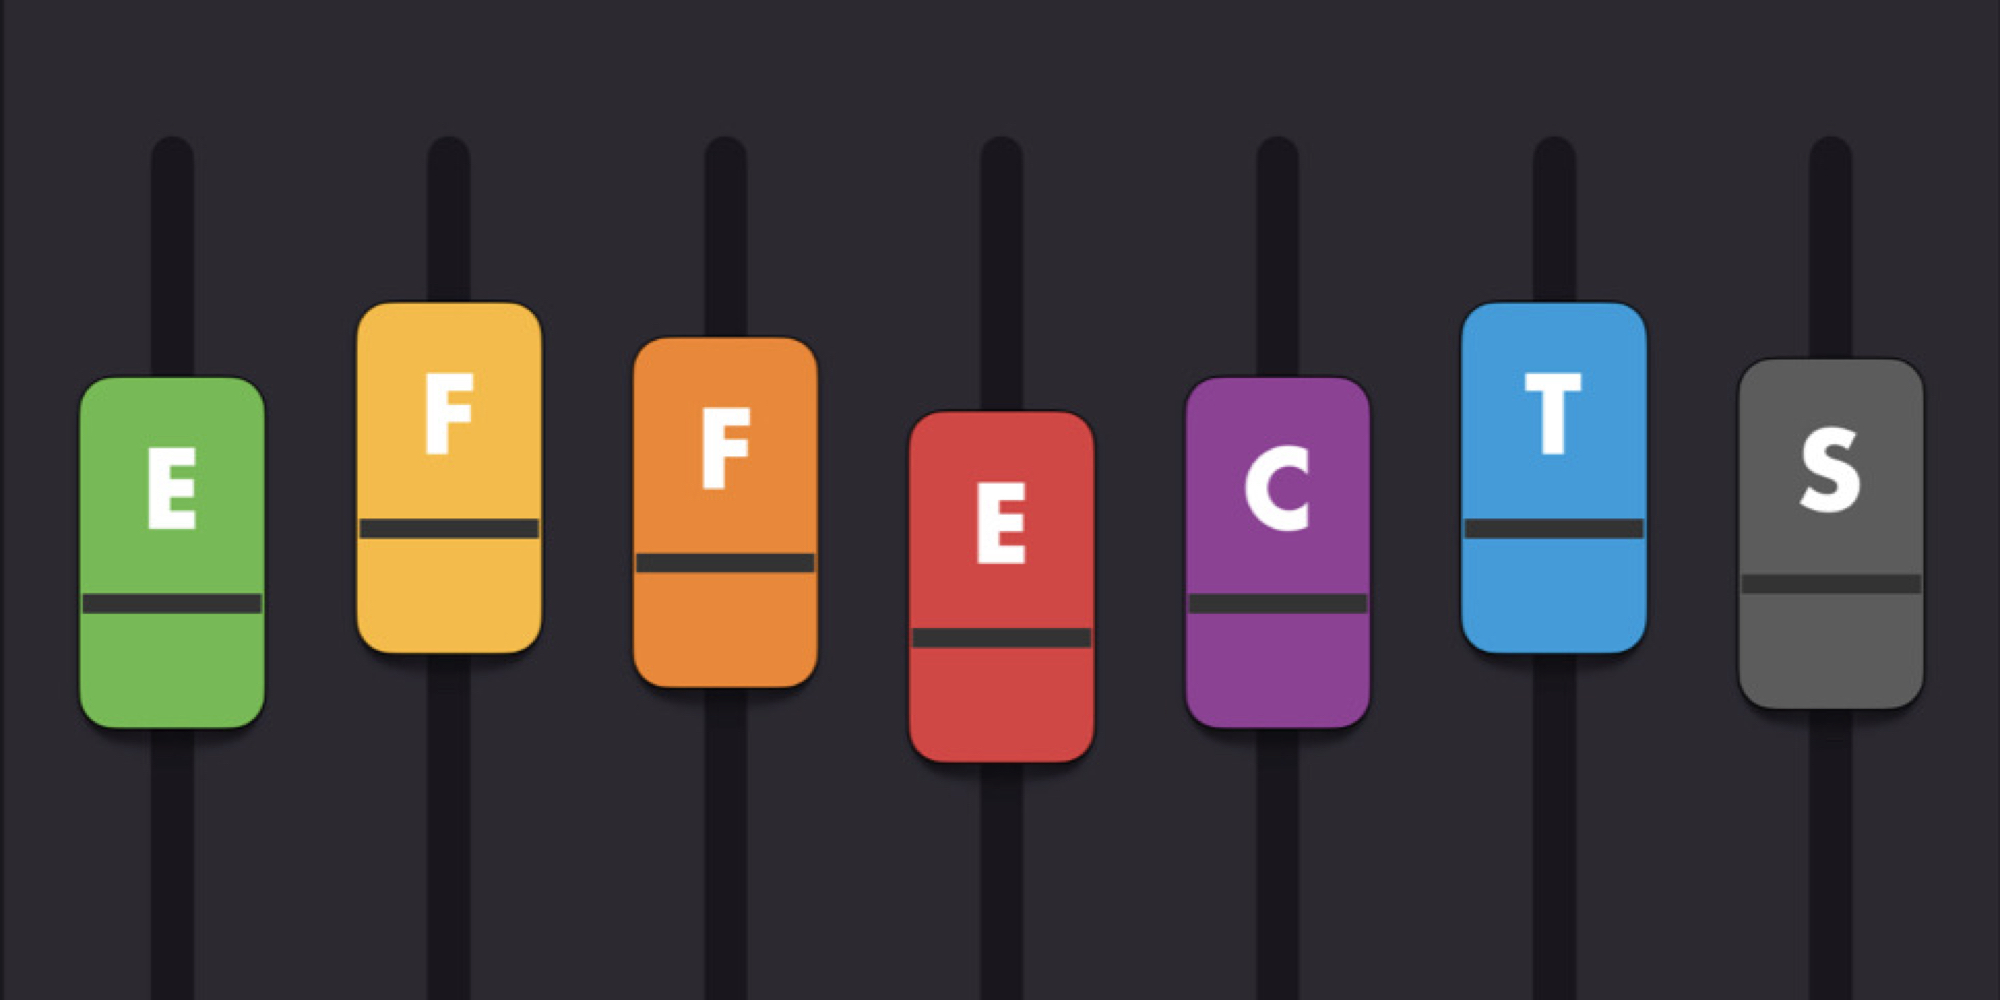 Effects journal cover. Letters of the word ‘Effects’ placed on coloured mixing desk faders.